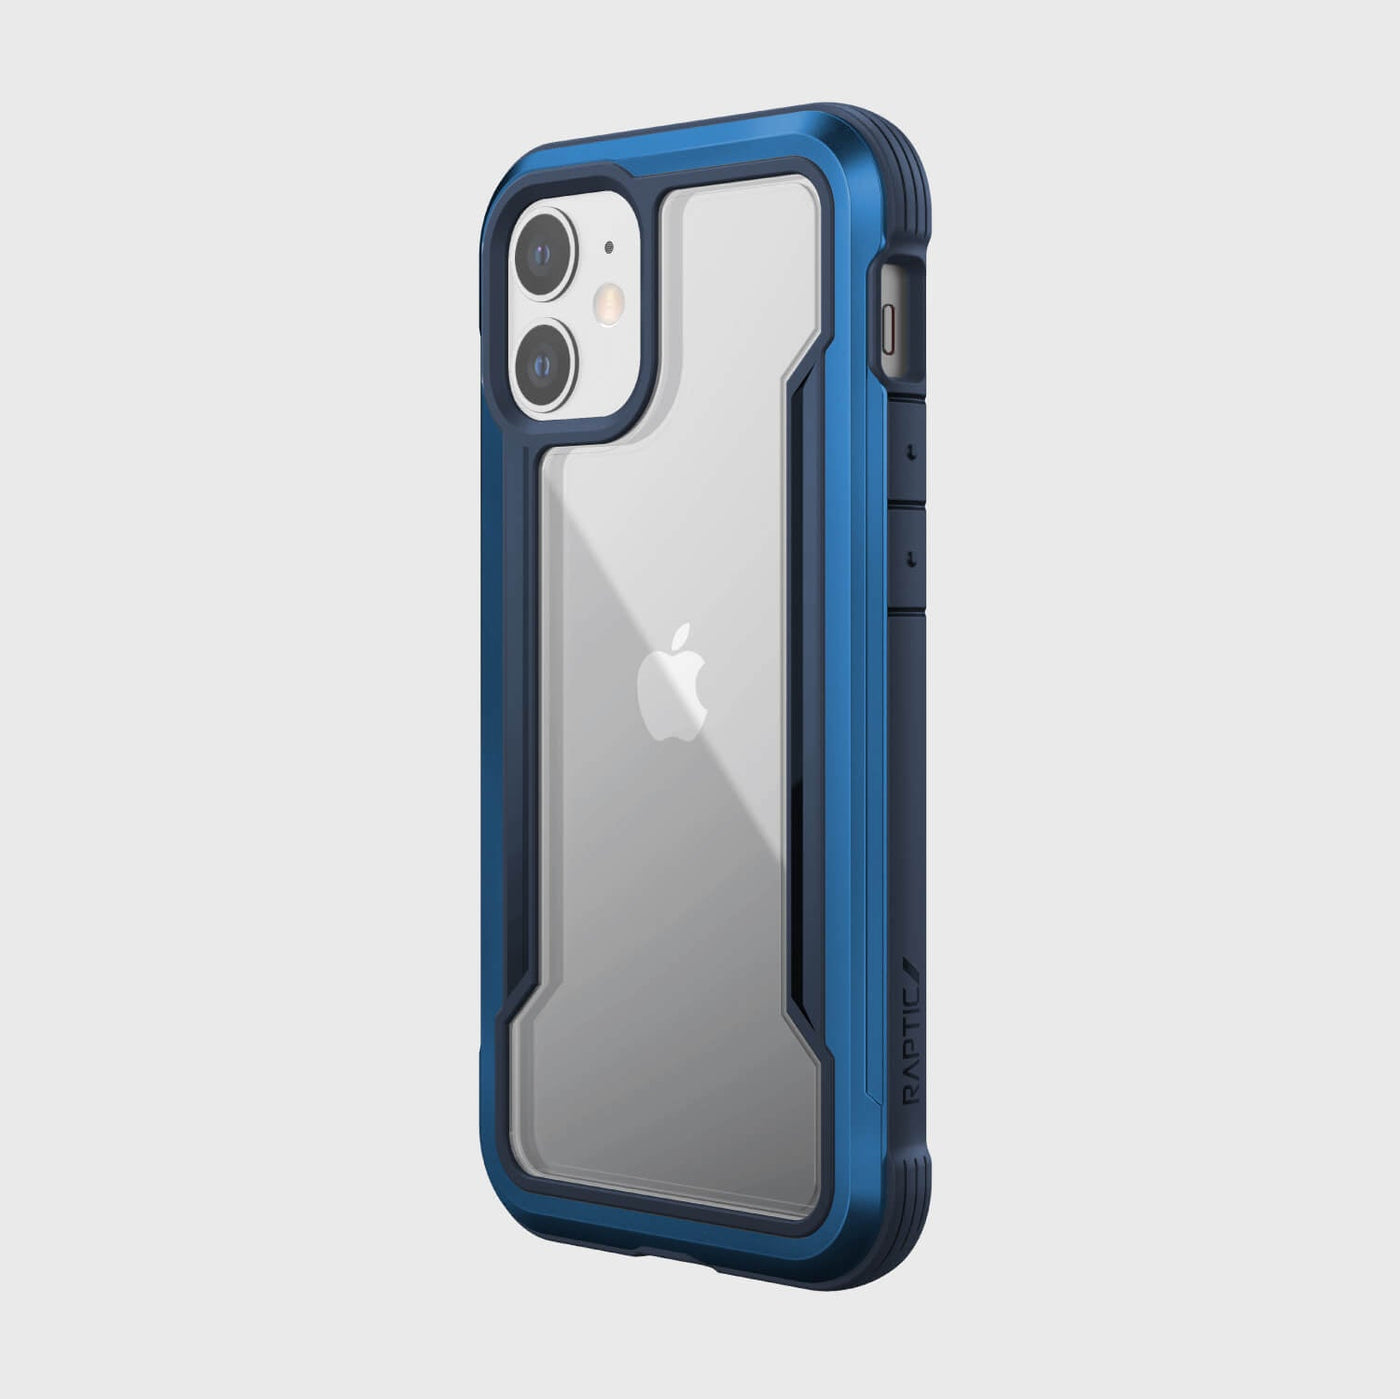 Raptic Shield Case for iPhone 12/12 Pro, Shock Absorbing, 10 ft Drop Tested, Iridescent, Clear Back